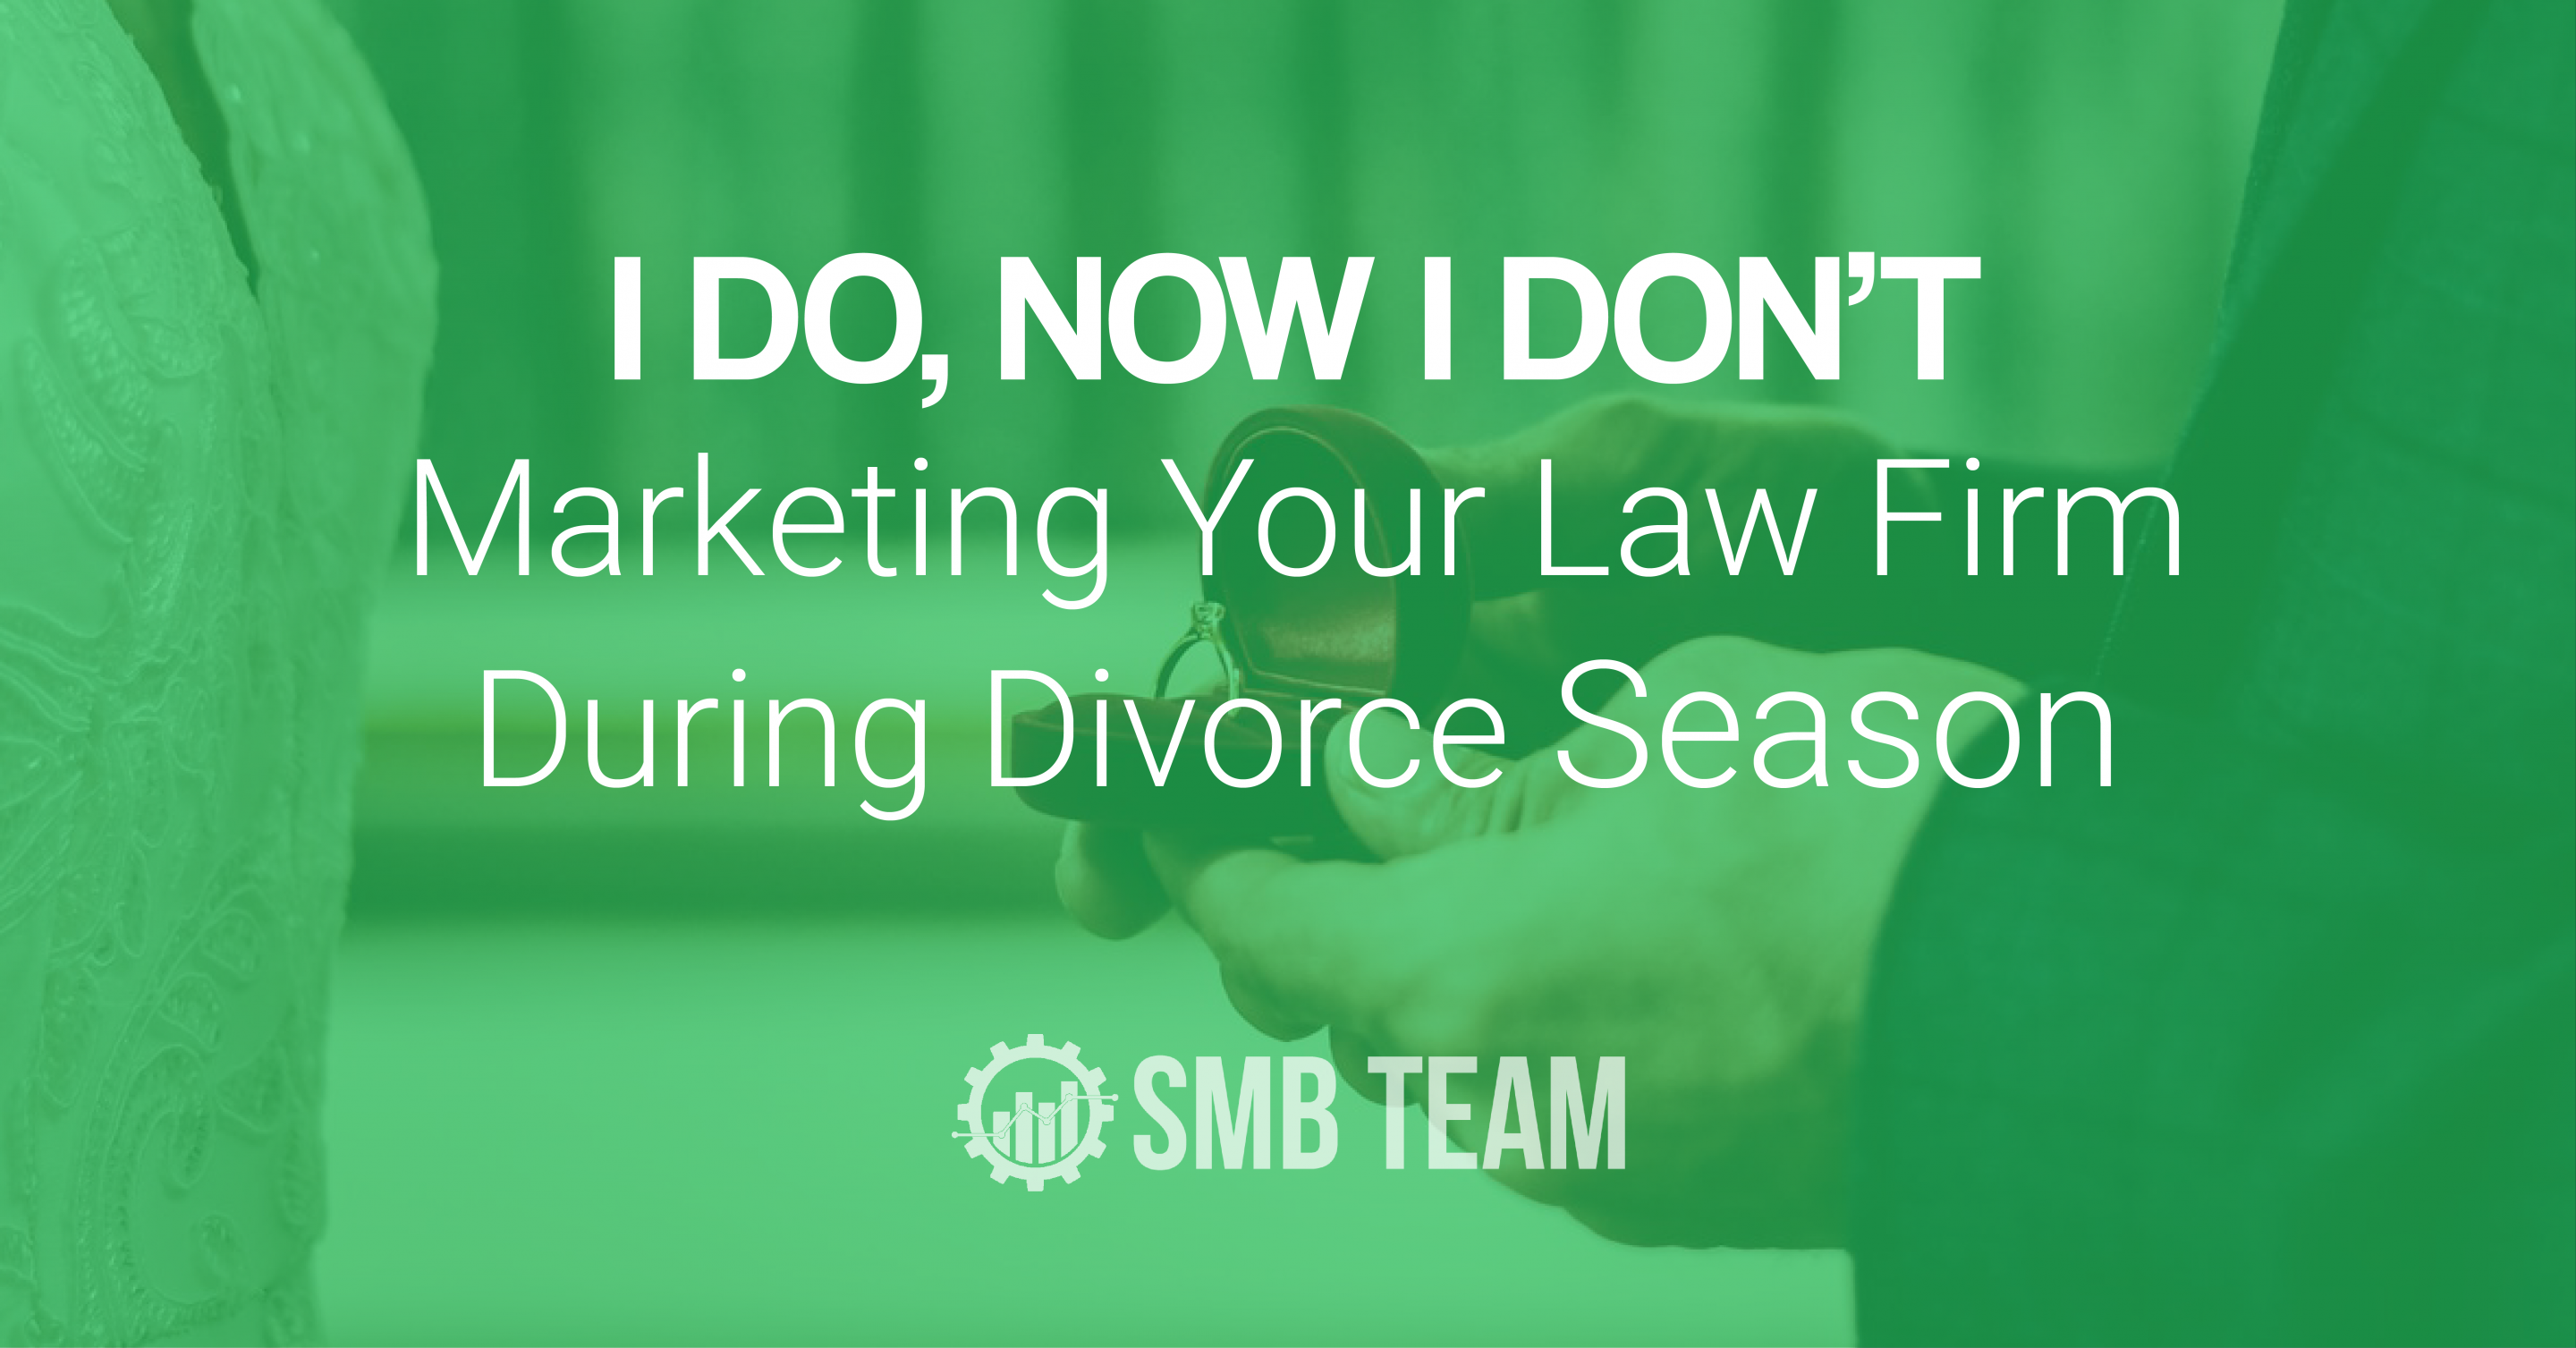 The Busy Season For Divorce: How To Market To Divorce Clients During Summer